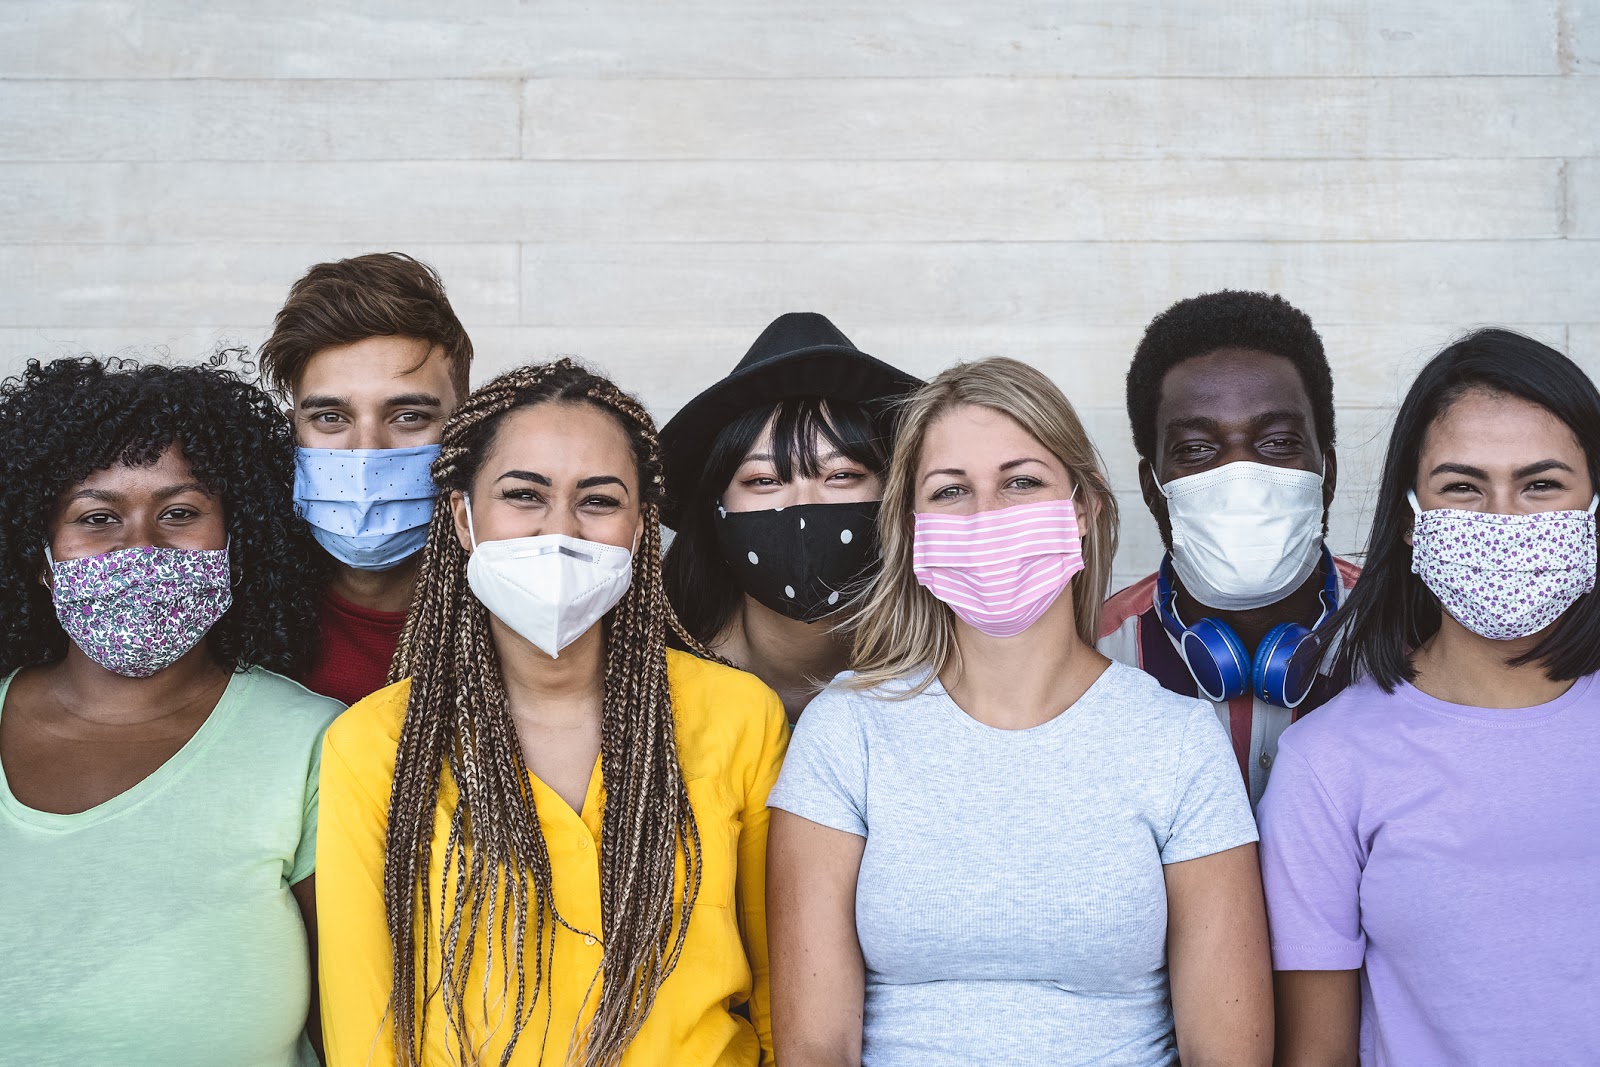 Group young people wearing face mask for preventing corona virus outbreak - Millennial friends with different age and culture portrait - Coronavirus disease and youth multi ethnic concept